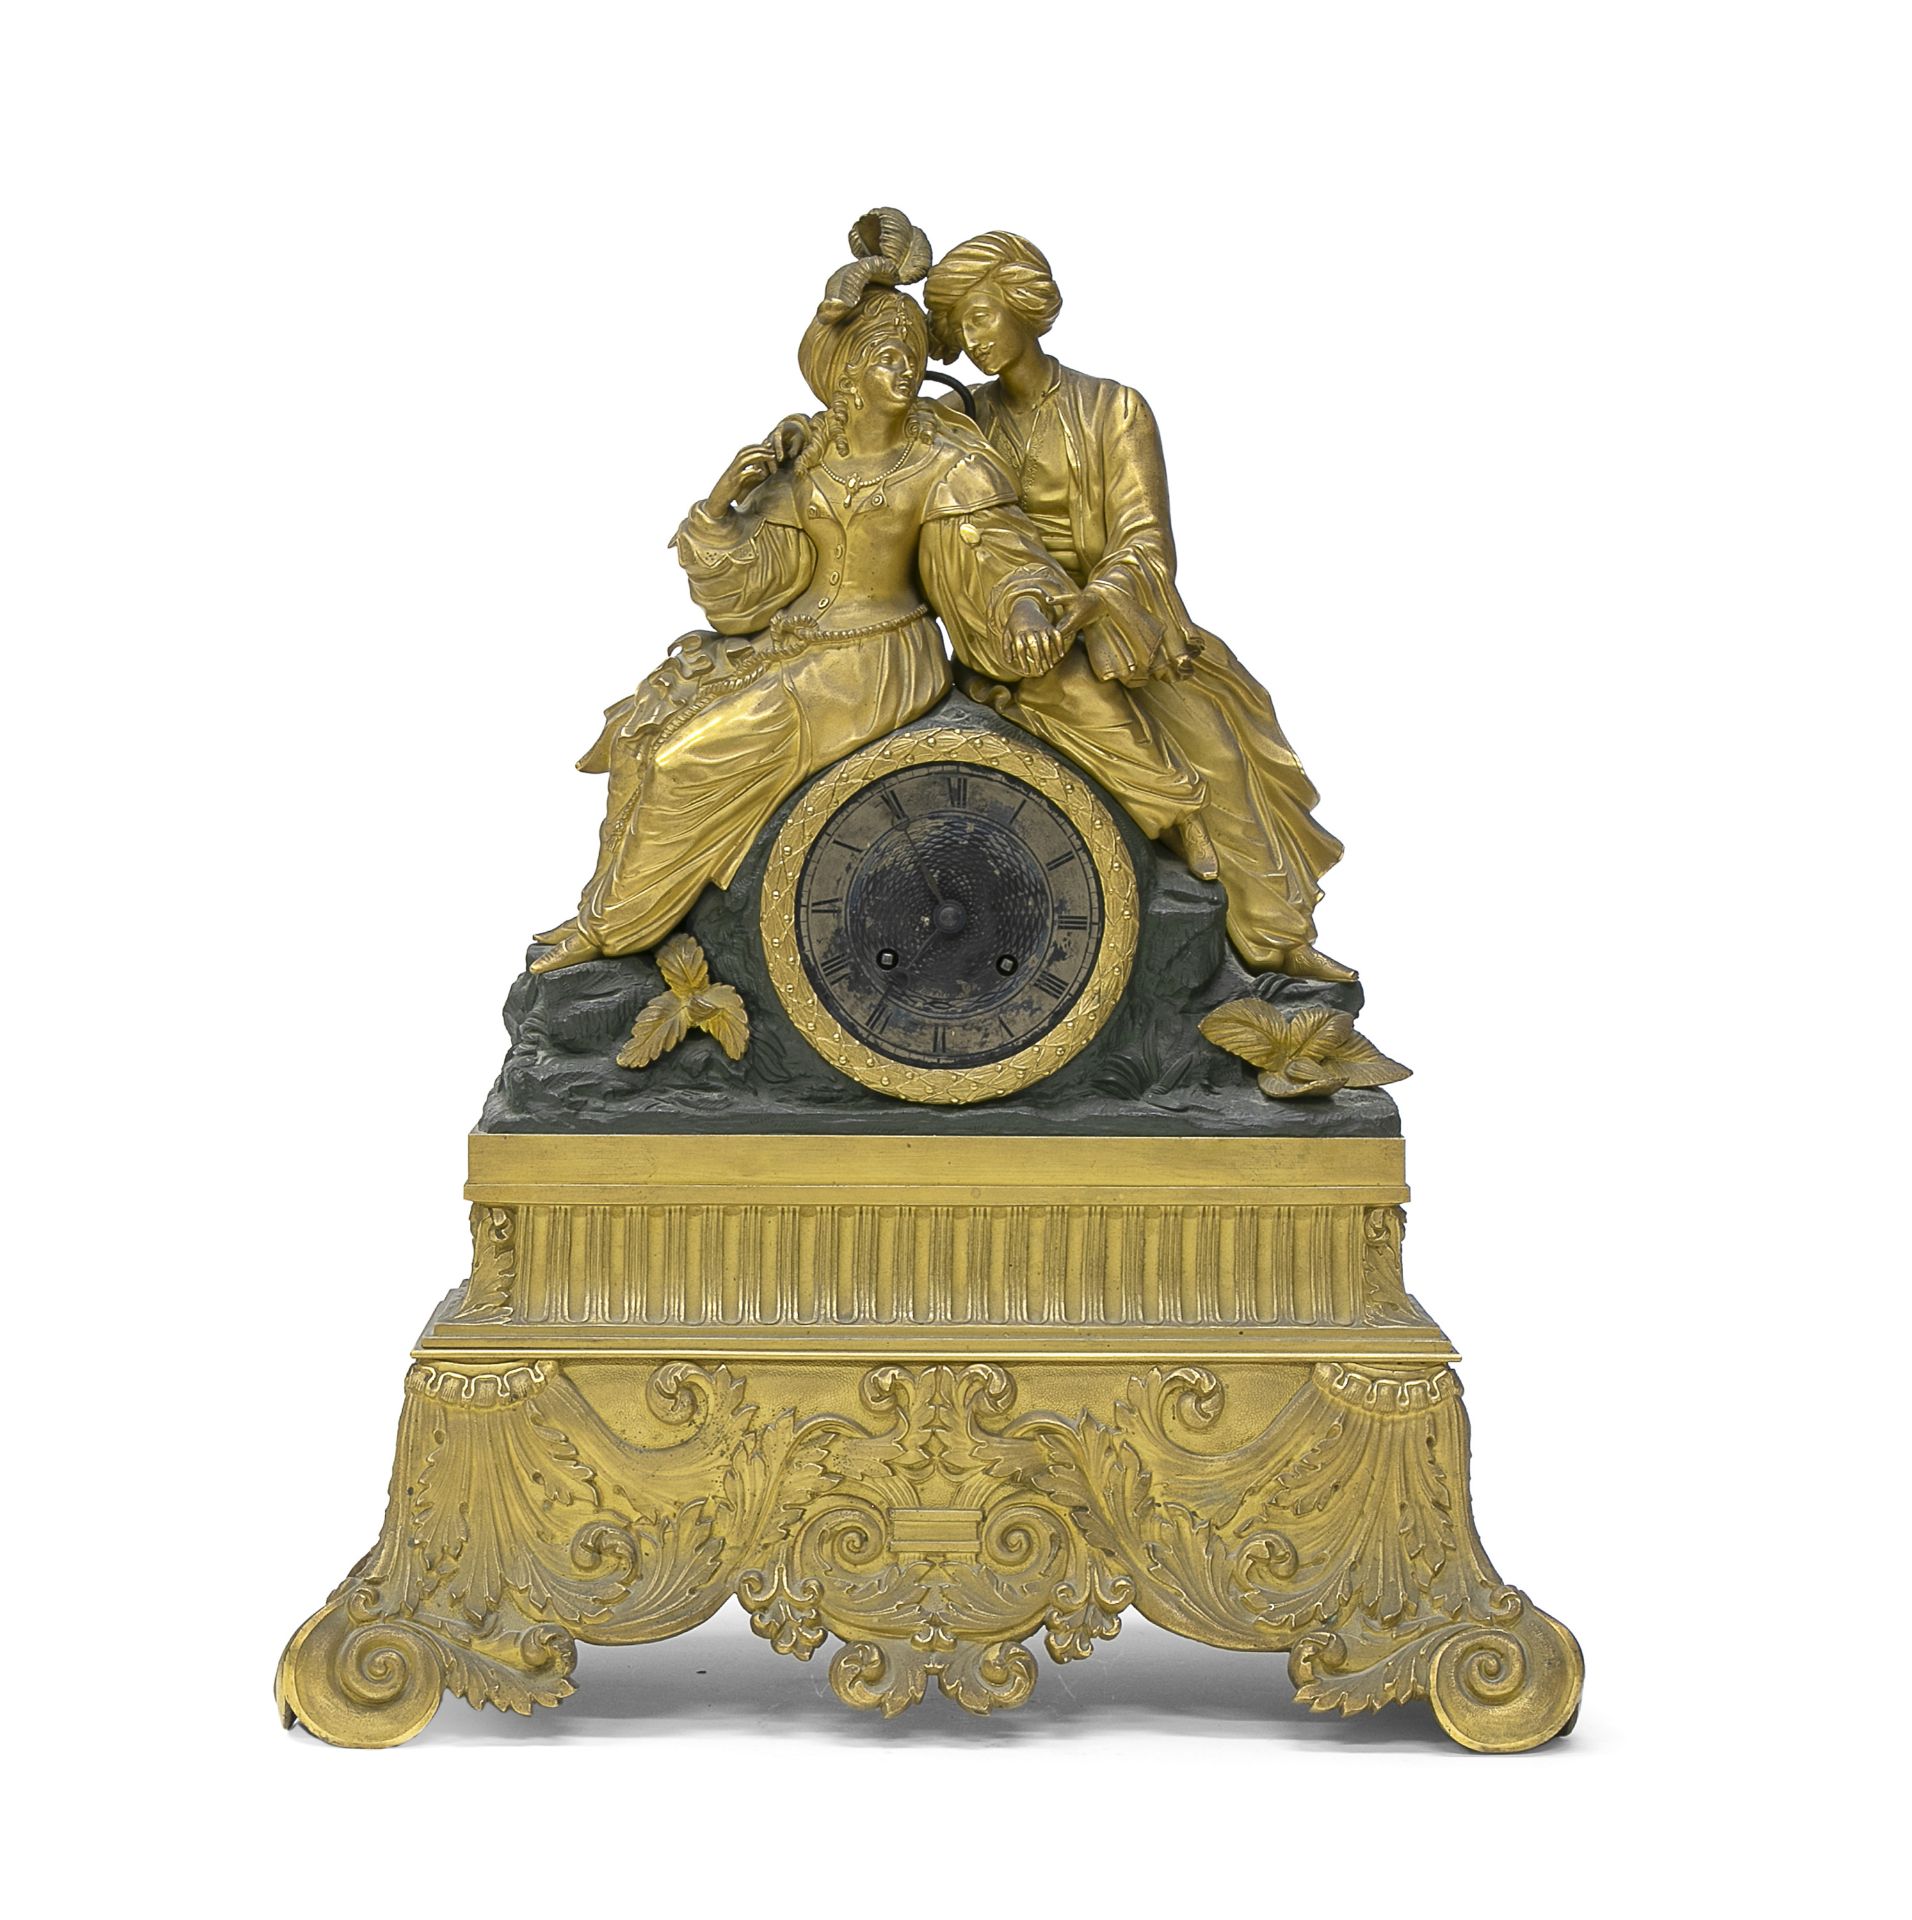 GILT BRONZE TABLE CLOCK FIRST HALF OF THE 19TH CENTURY